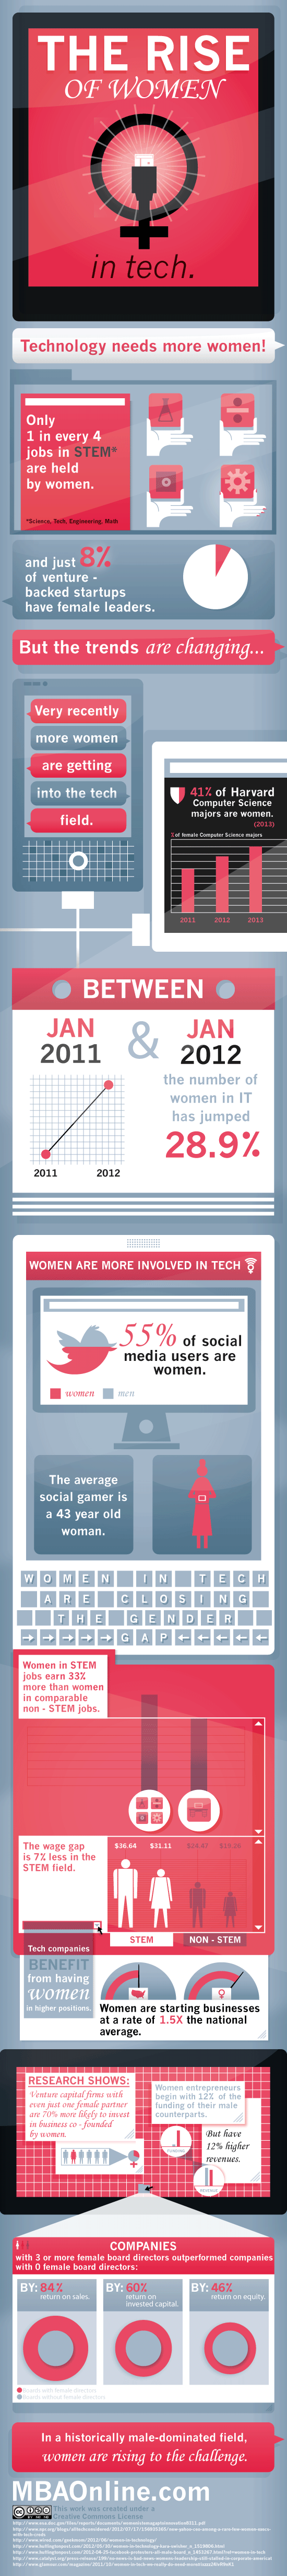 More Women are Entering the Field of Technology